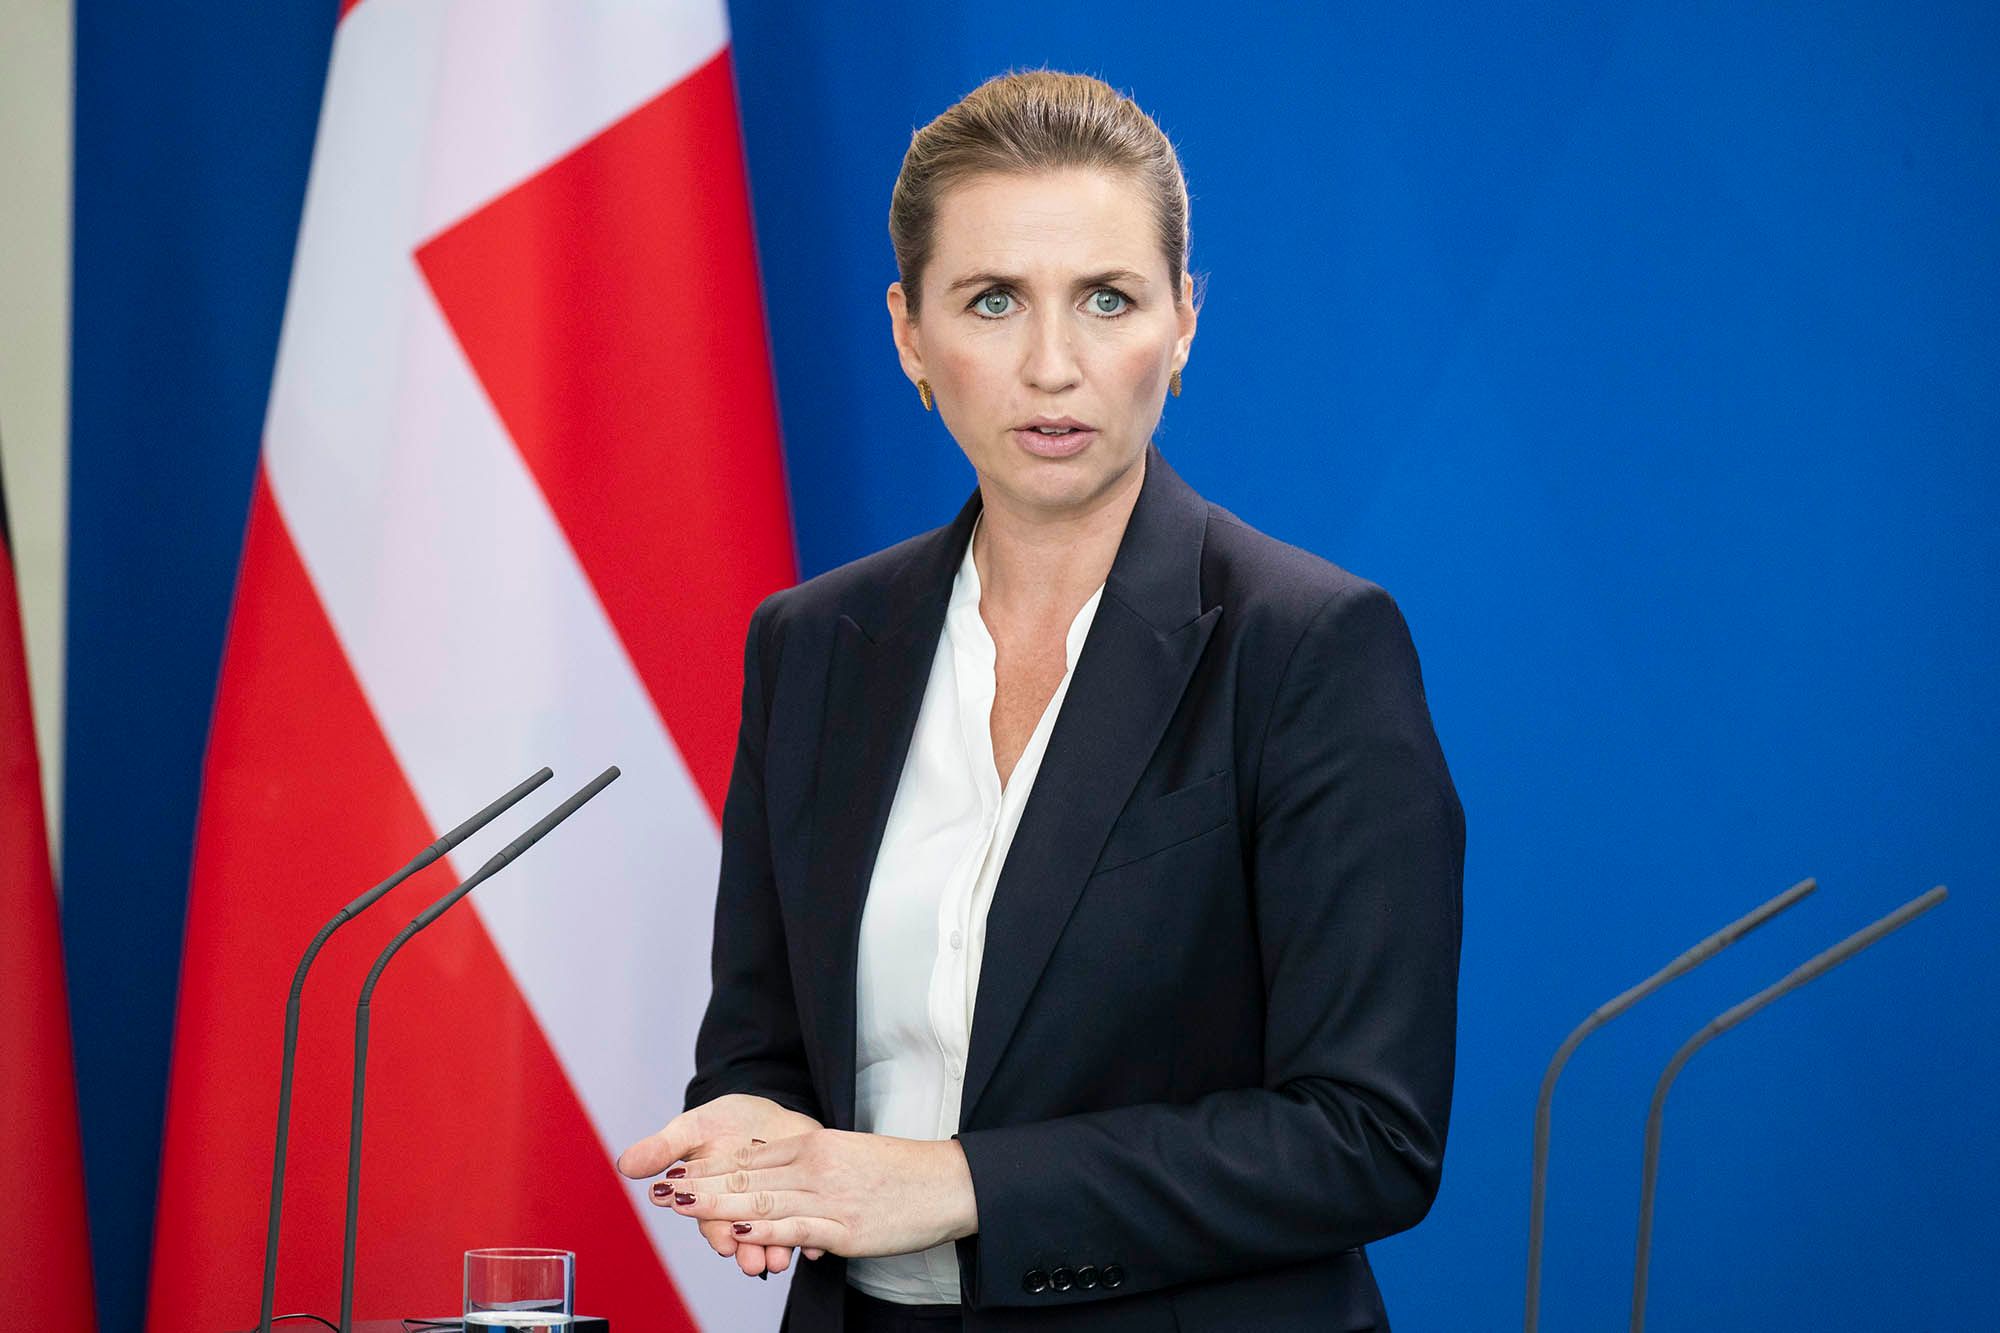 Danish Prime Minister leads new global commission - ScandAsia